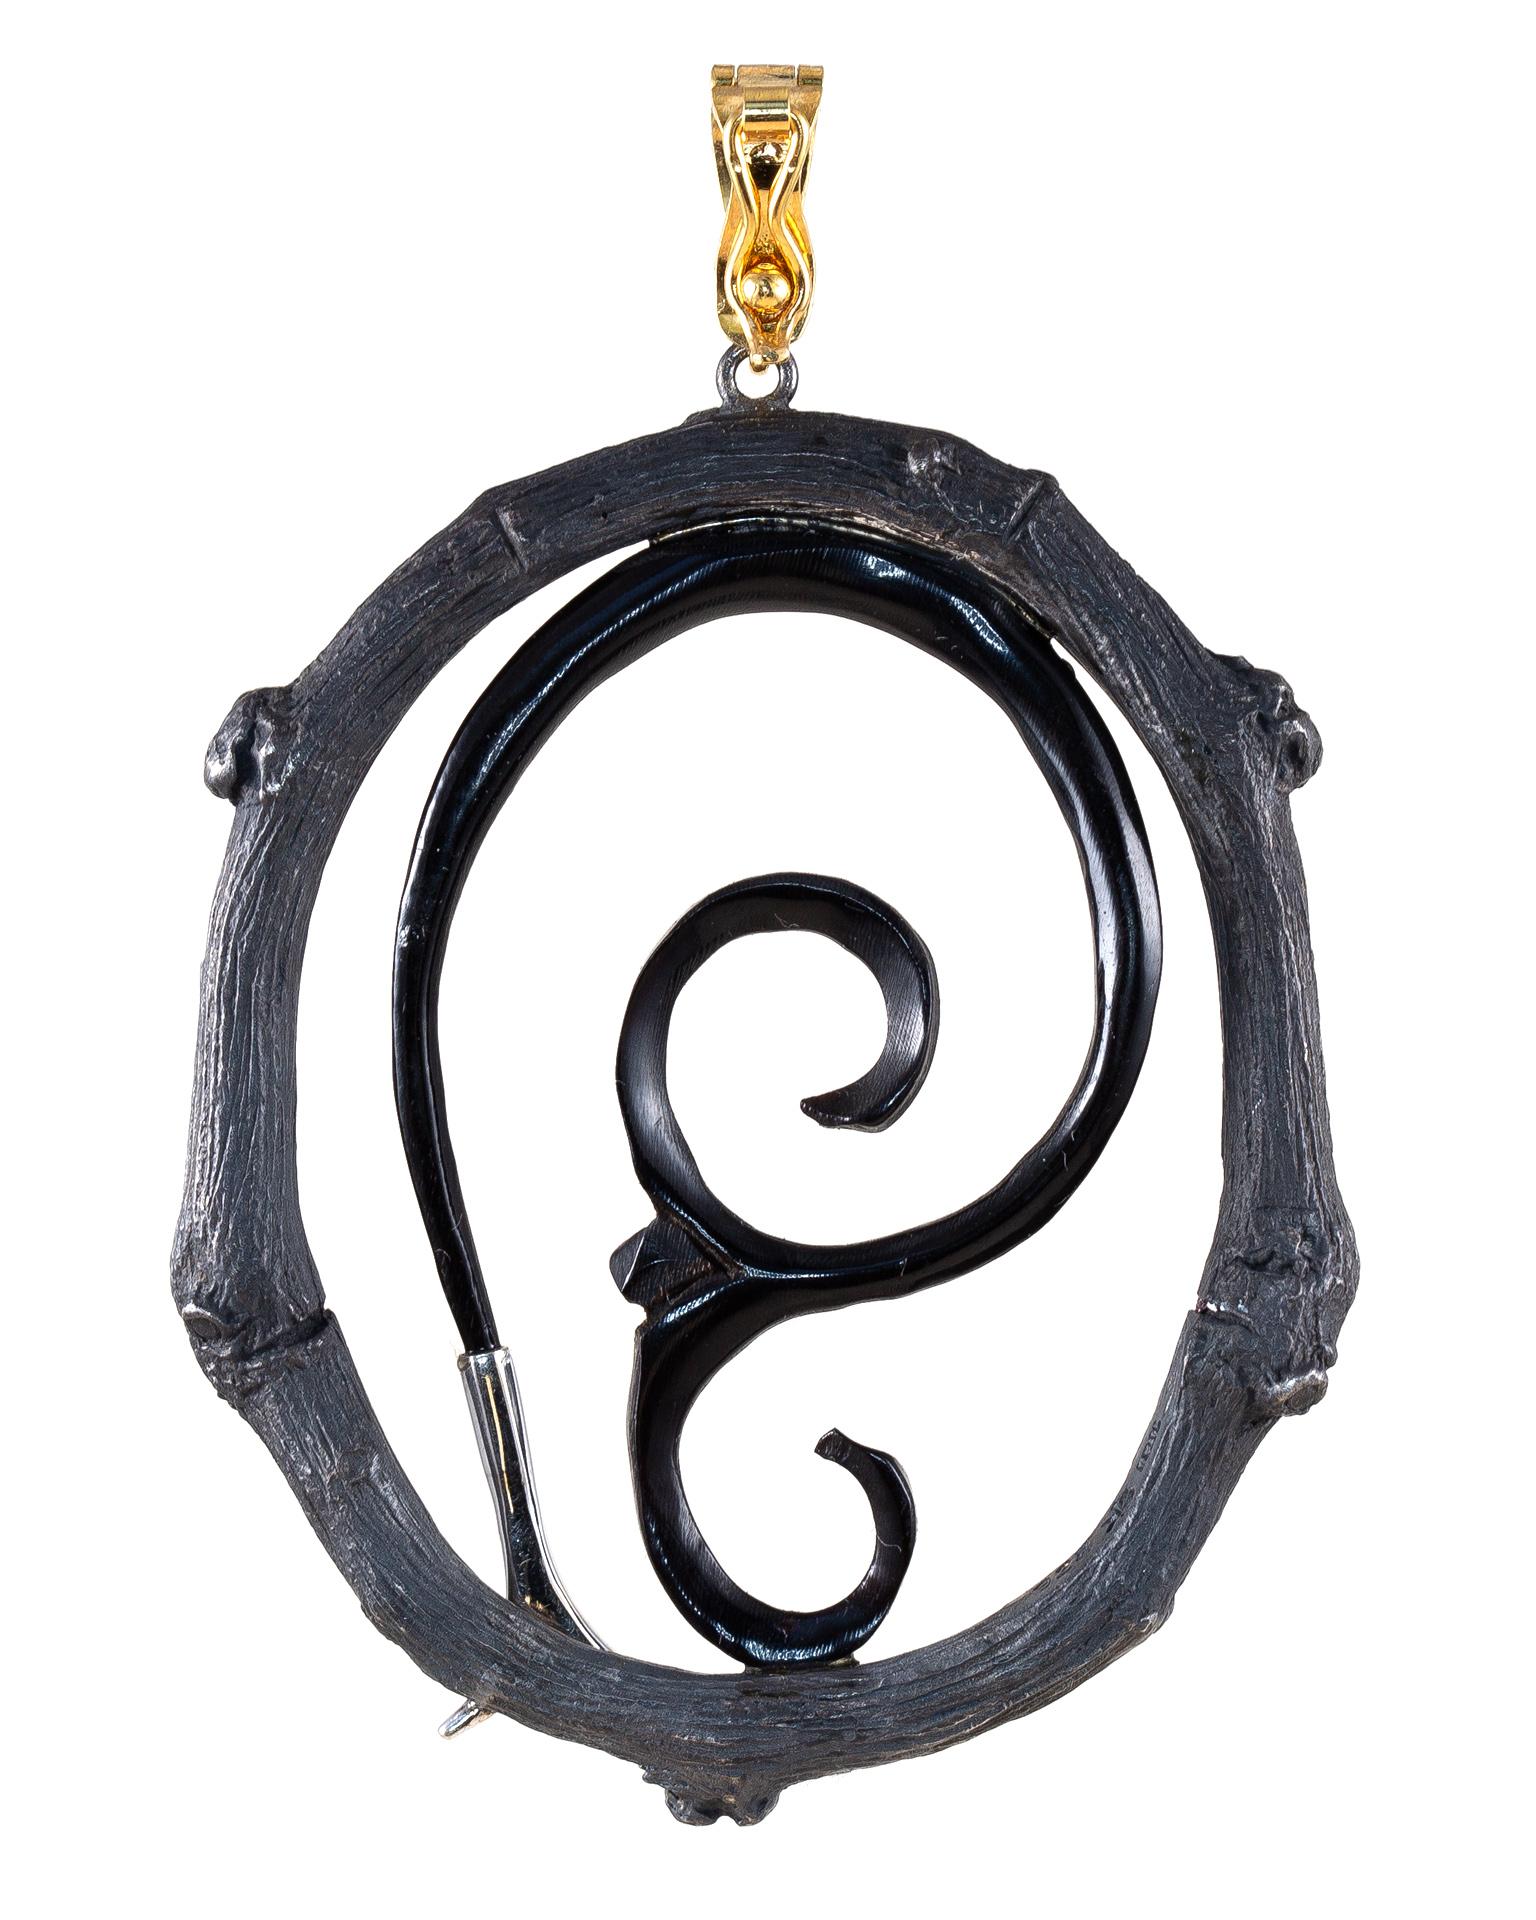 This Time Traveler pendant is composed of carved buffalo horn with 18k white and .07 carat total weight diamonds and black oxidized sterling silver frame. 

The Body Armor Collection embodies eternal symbols of protection that are both tribal and